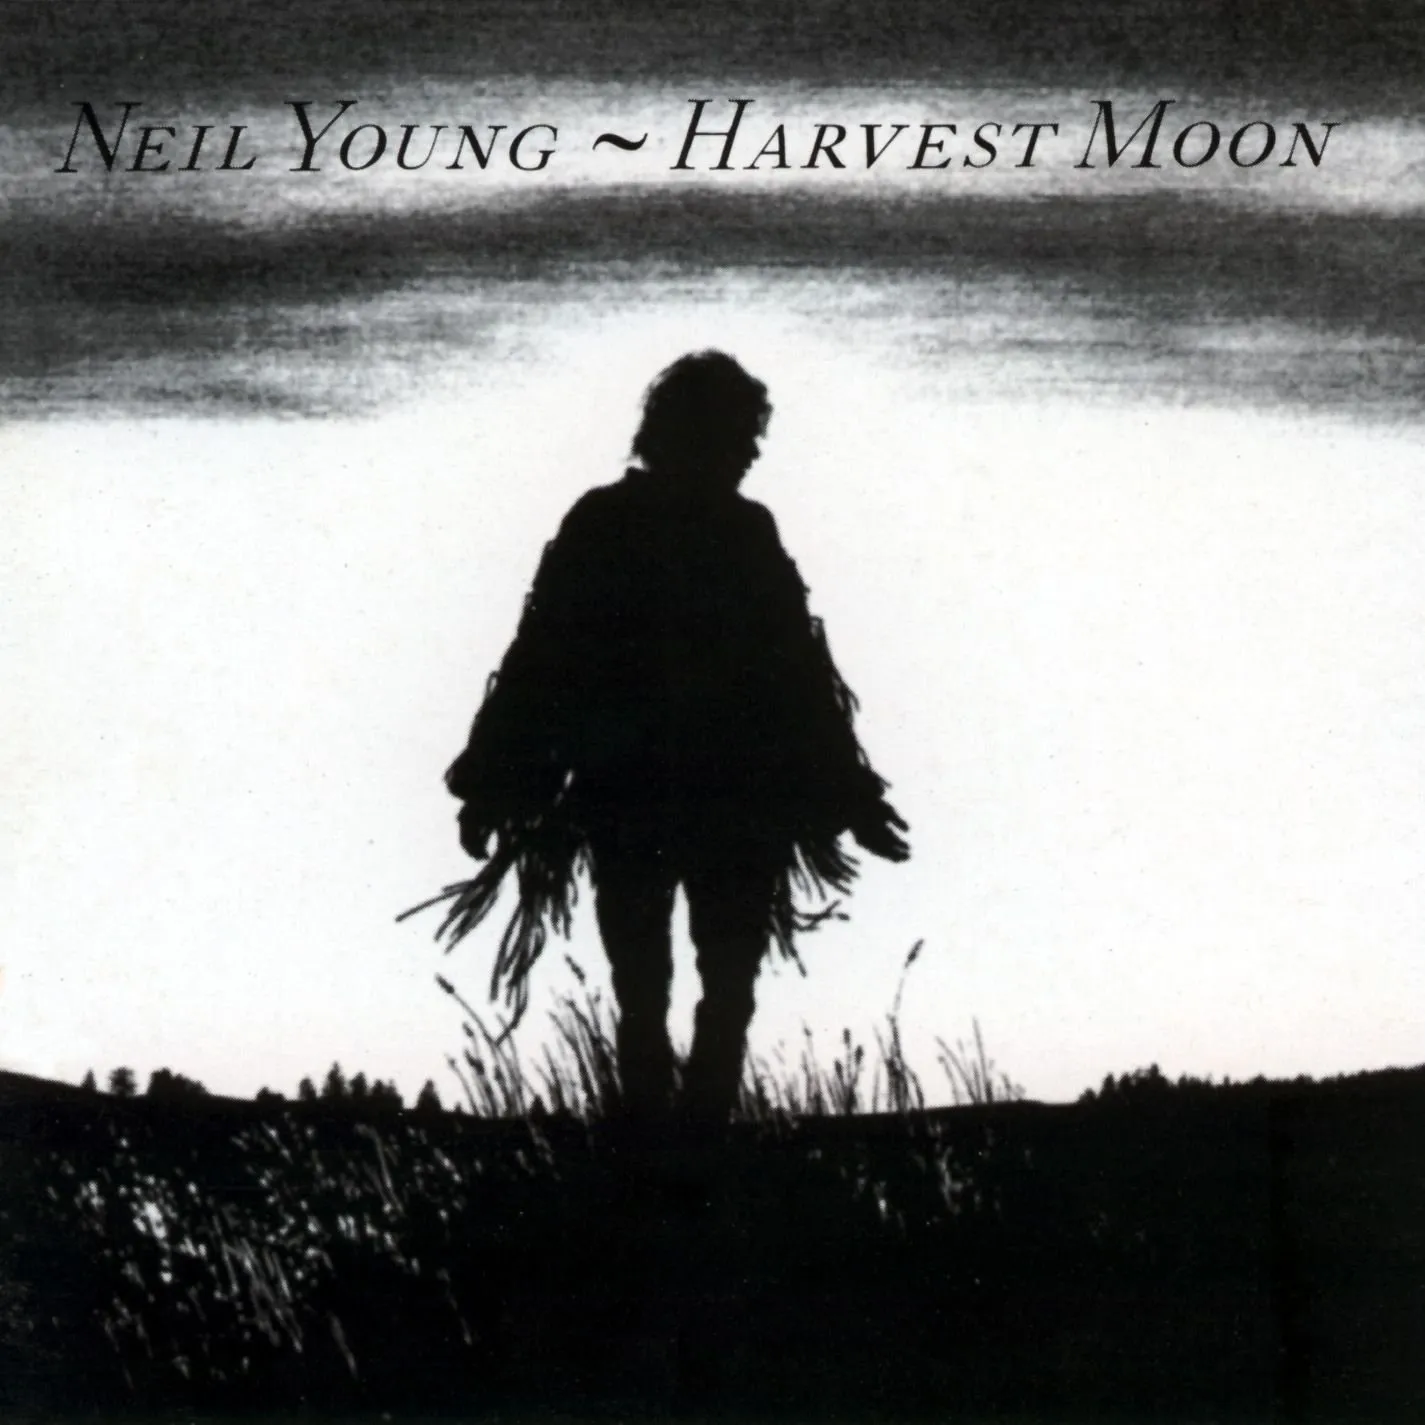 Neil Young - Harvest Moon artwork